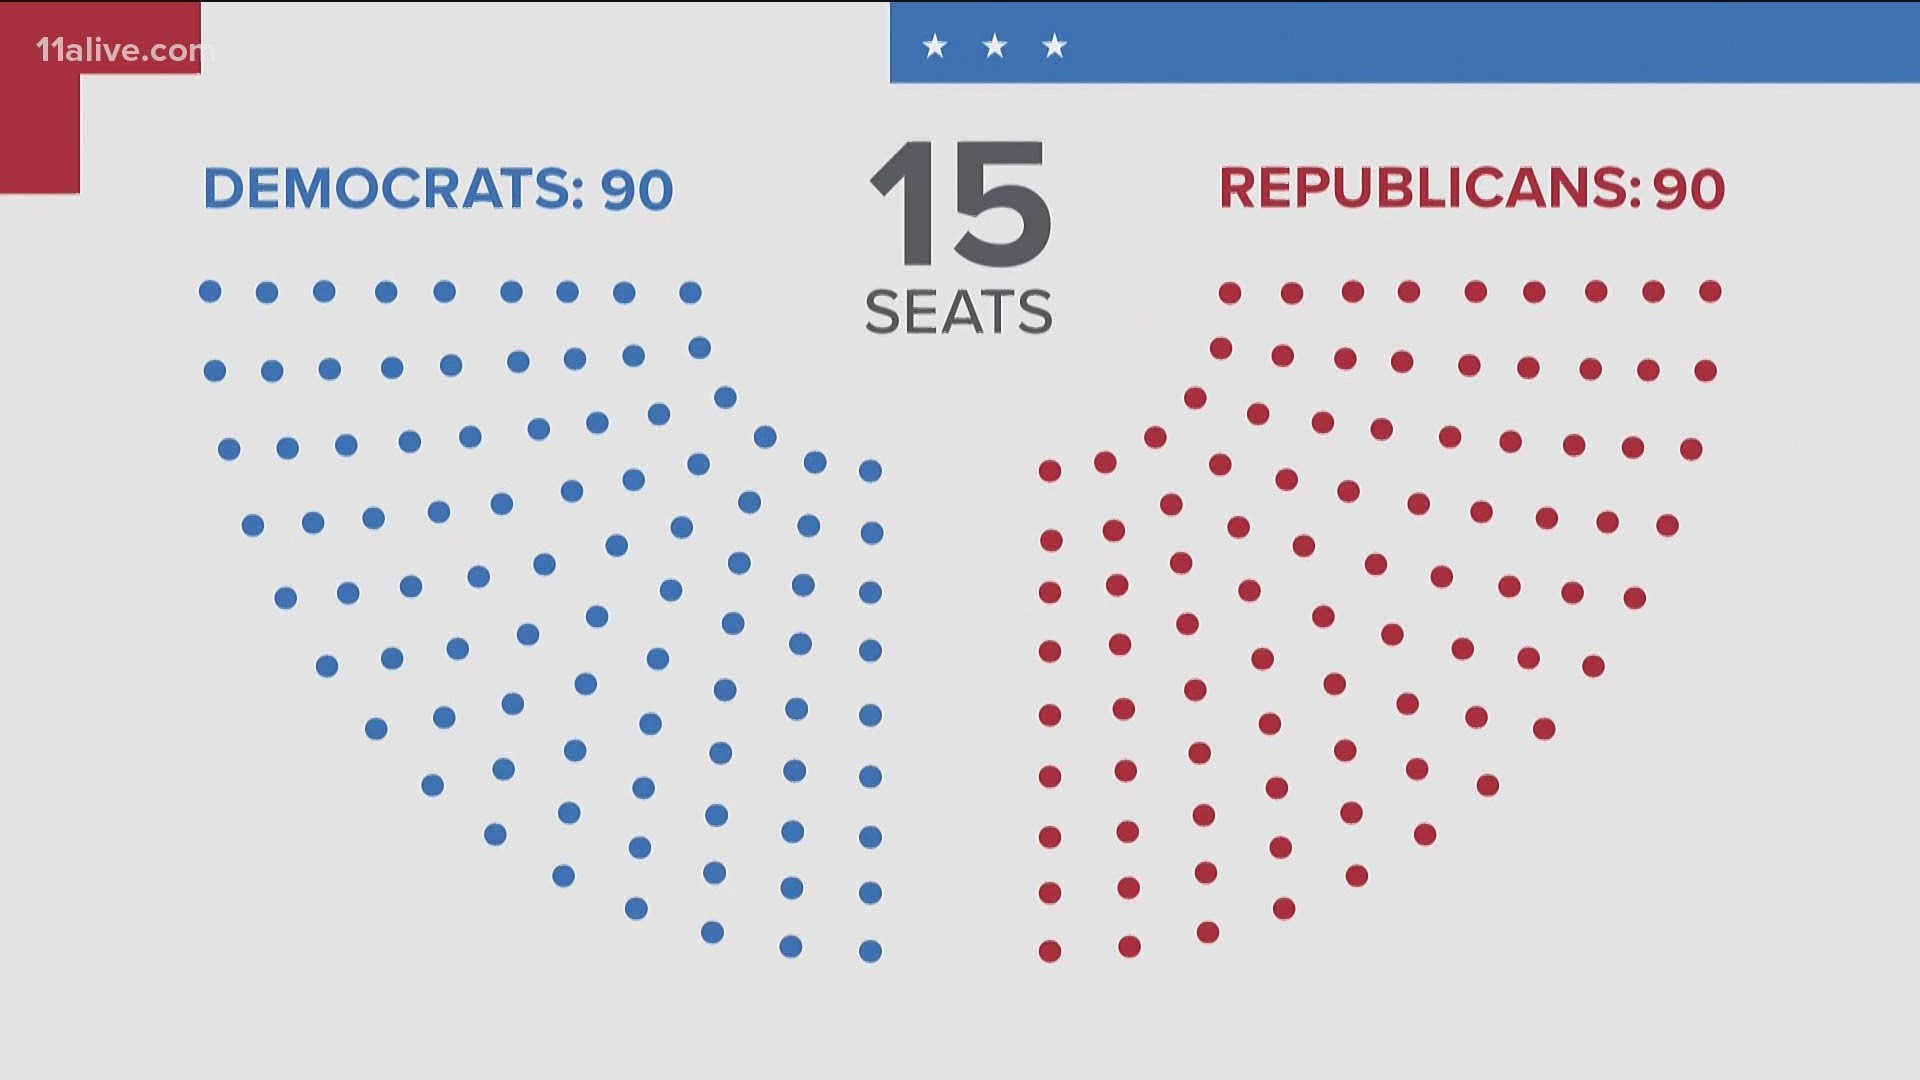 Democrats would need to flip fifteen more seats to achieve a tie, sixteen for a majority.